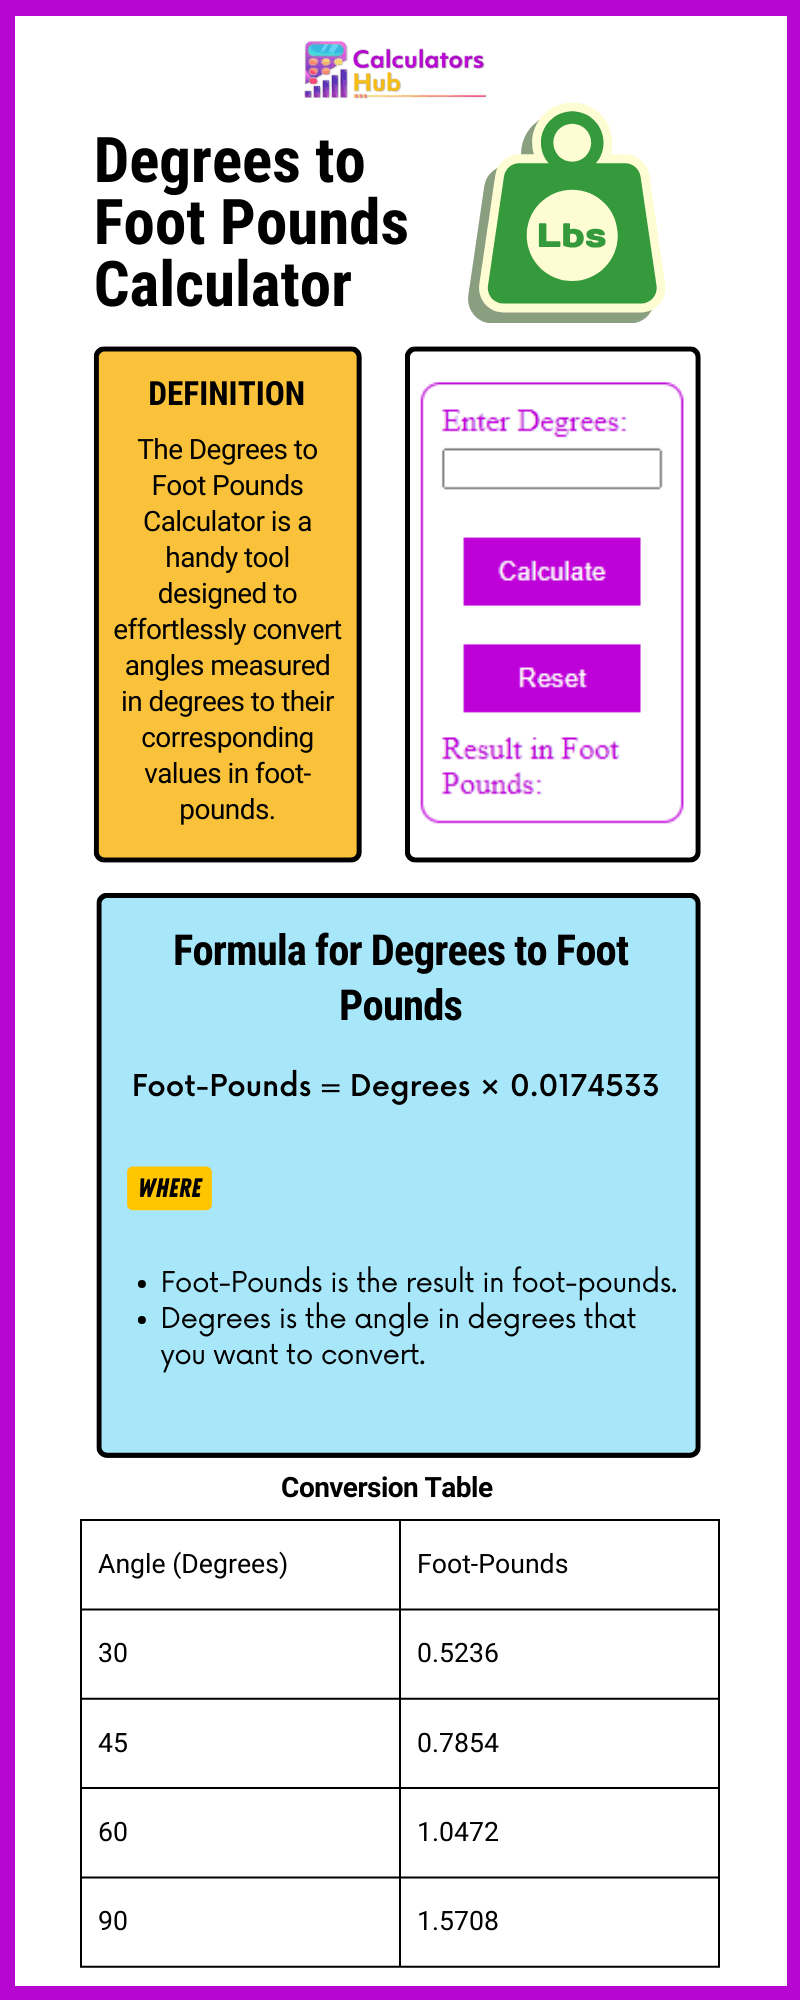 Degrees to Foot Pounds Calculator